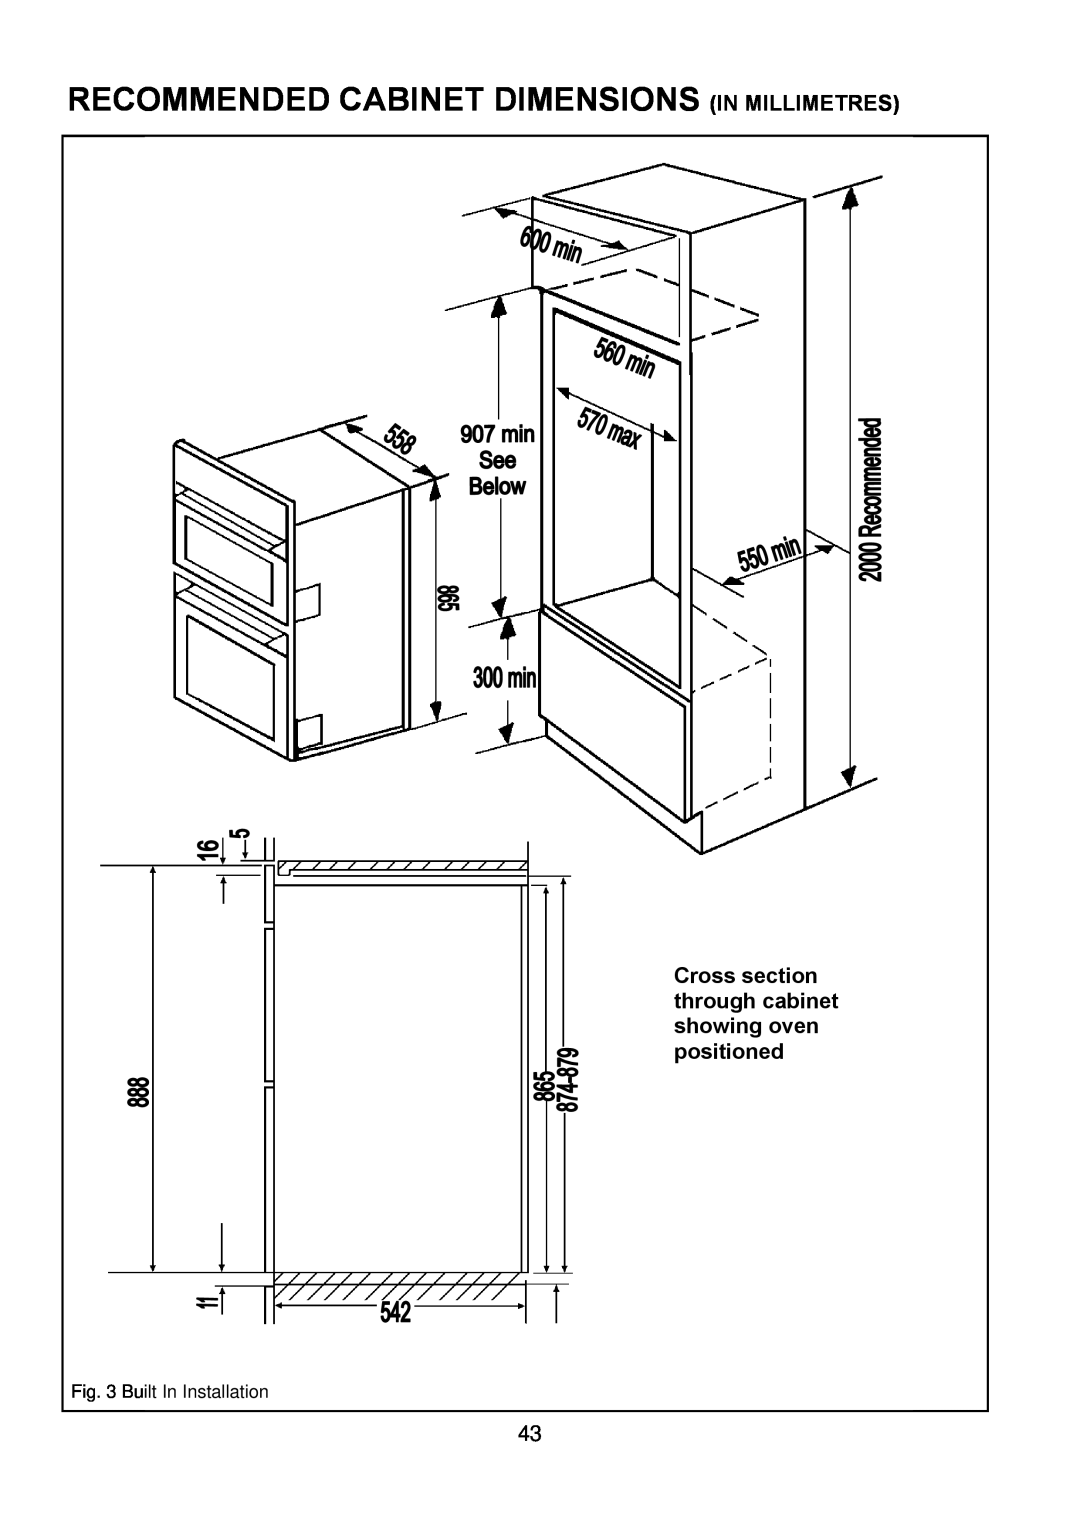 Zanussi ZDQ 995 manual Recommended Cabinet Dimensions In Millimetres, Cross section through cabinet showing oven positioned 